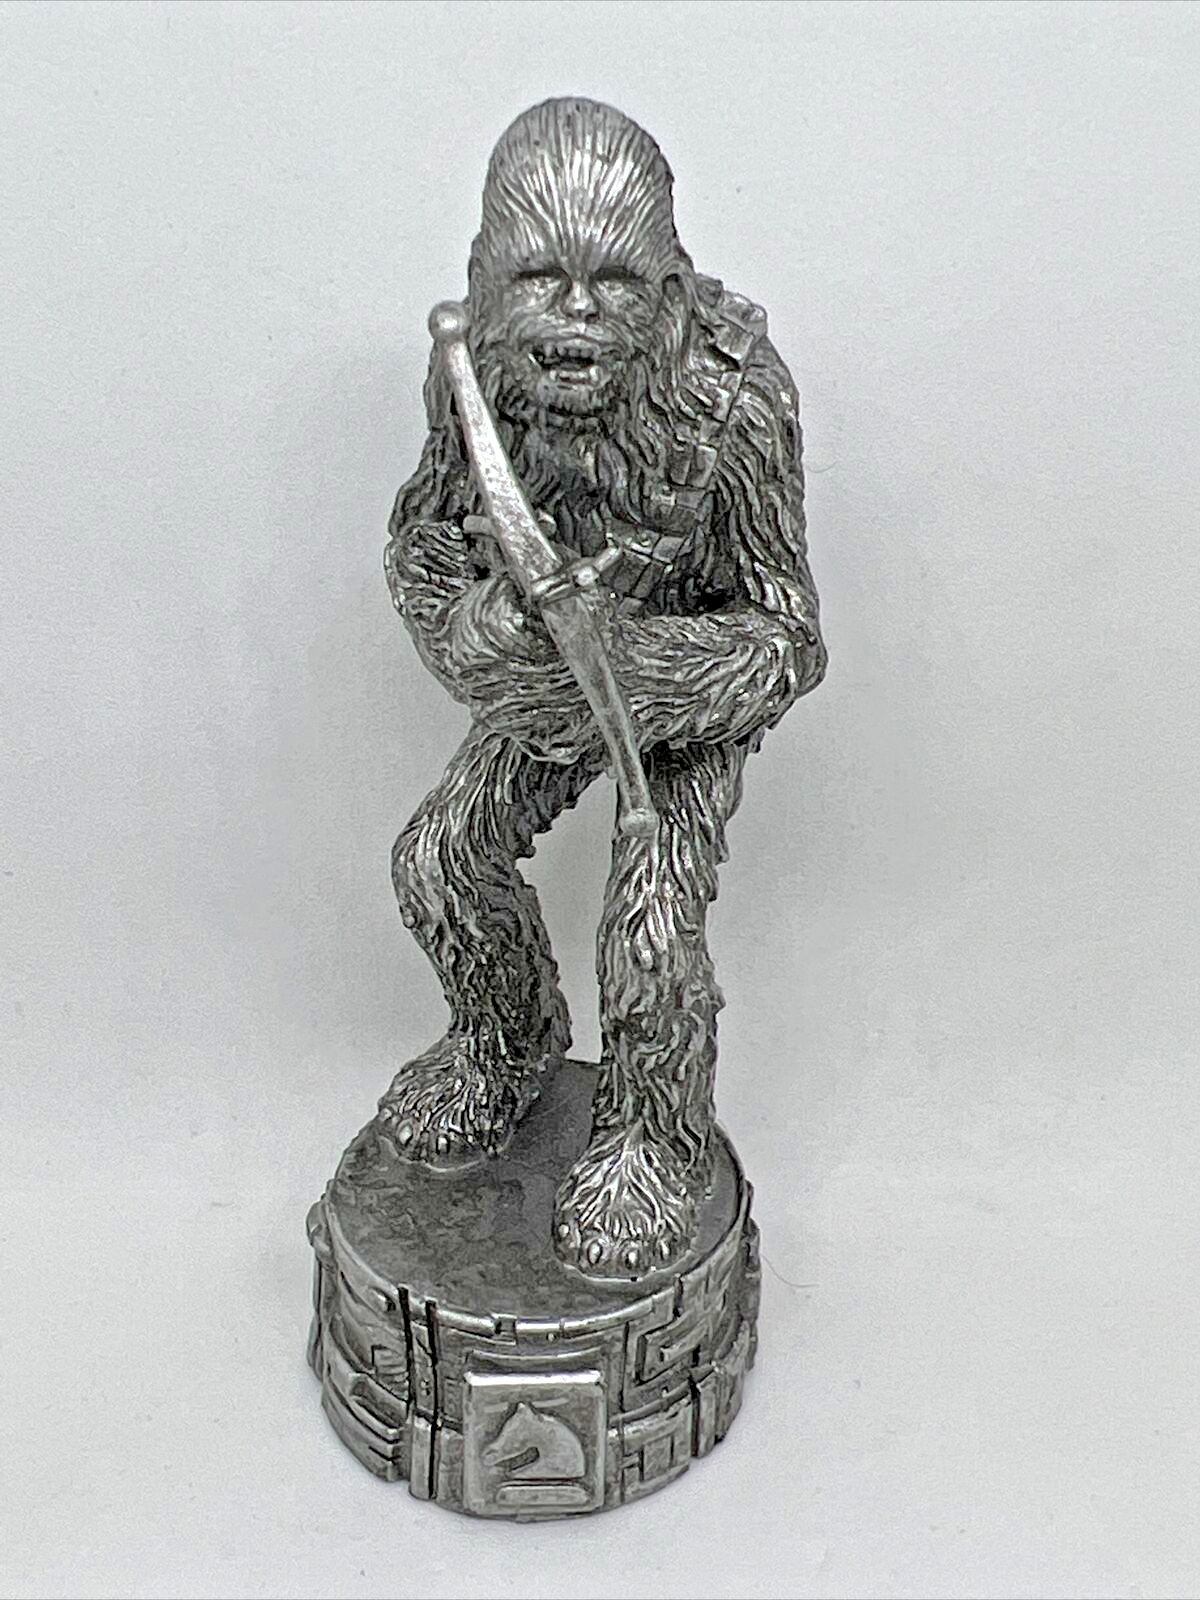 Star Wars Saga Edition Chewbacca Crossbow Silver Replacement Chess Piece 2005 - $9.49